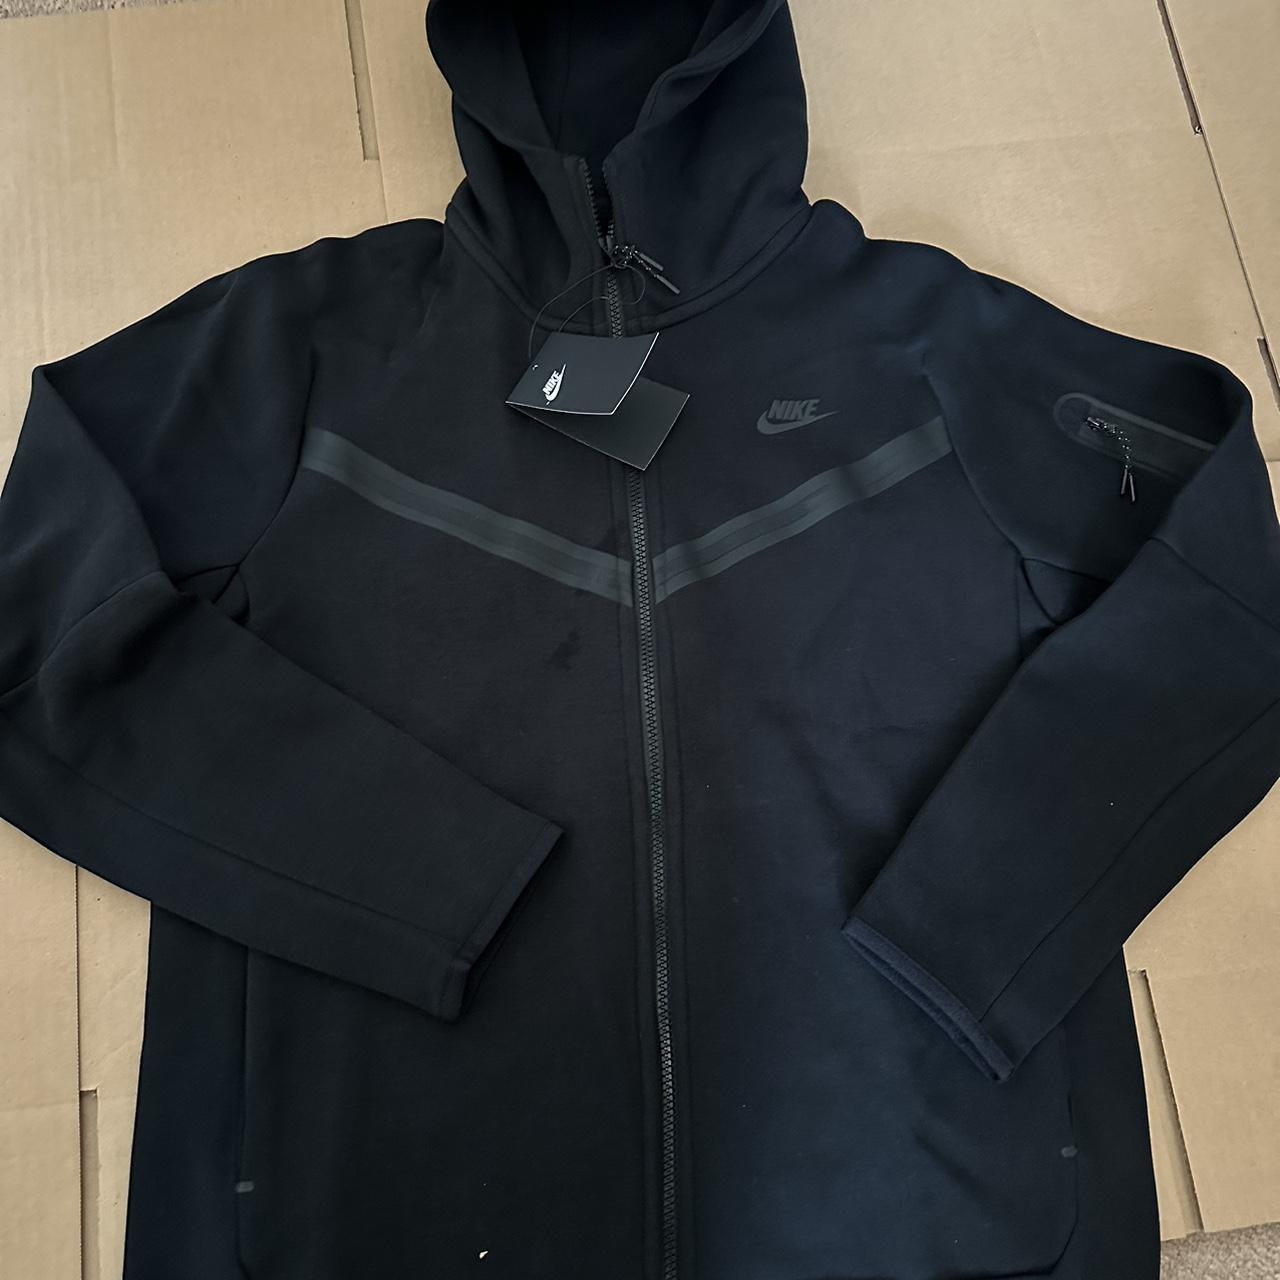 Large Nike tech BRAND NEW NEVER WORN WITH TAGS ON... - Depop